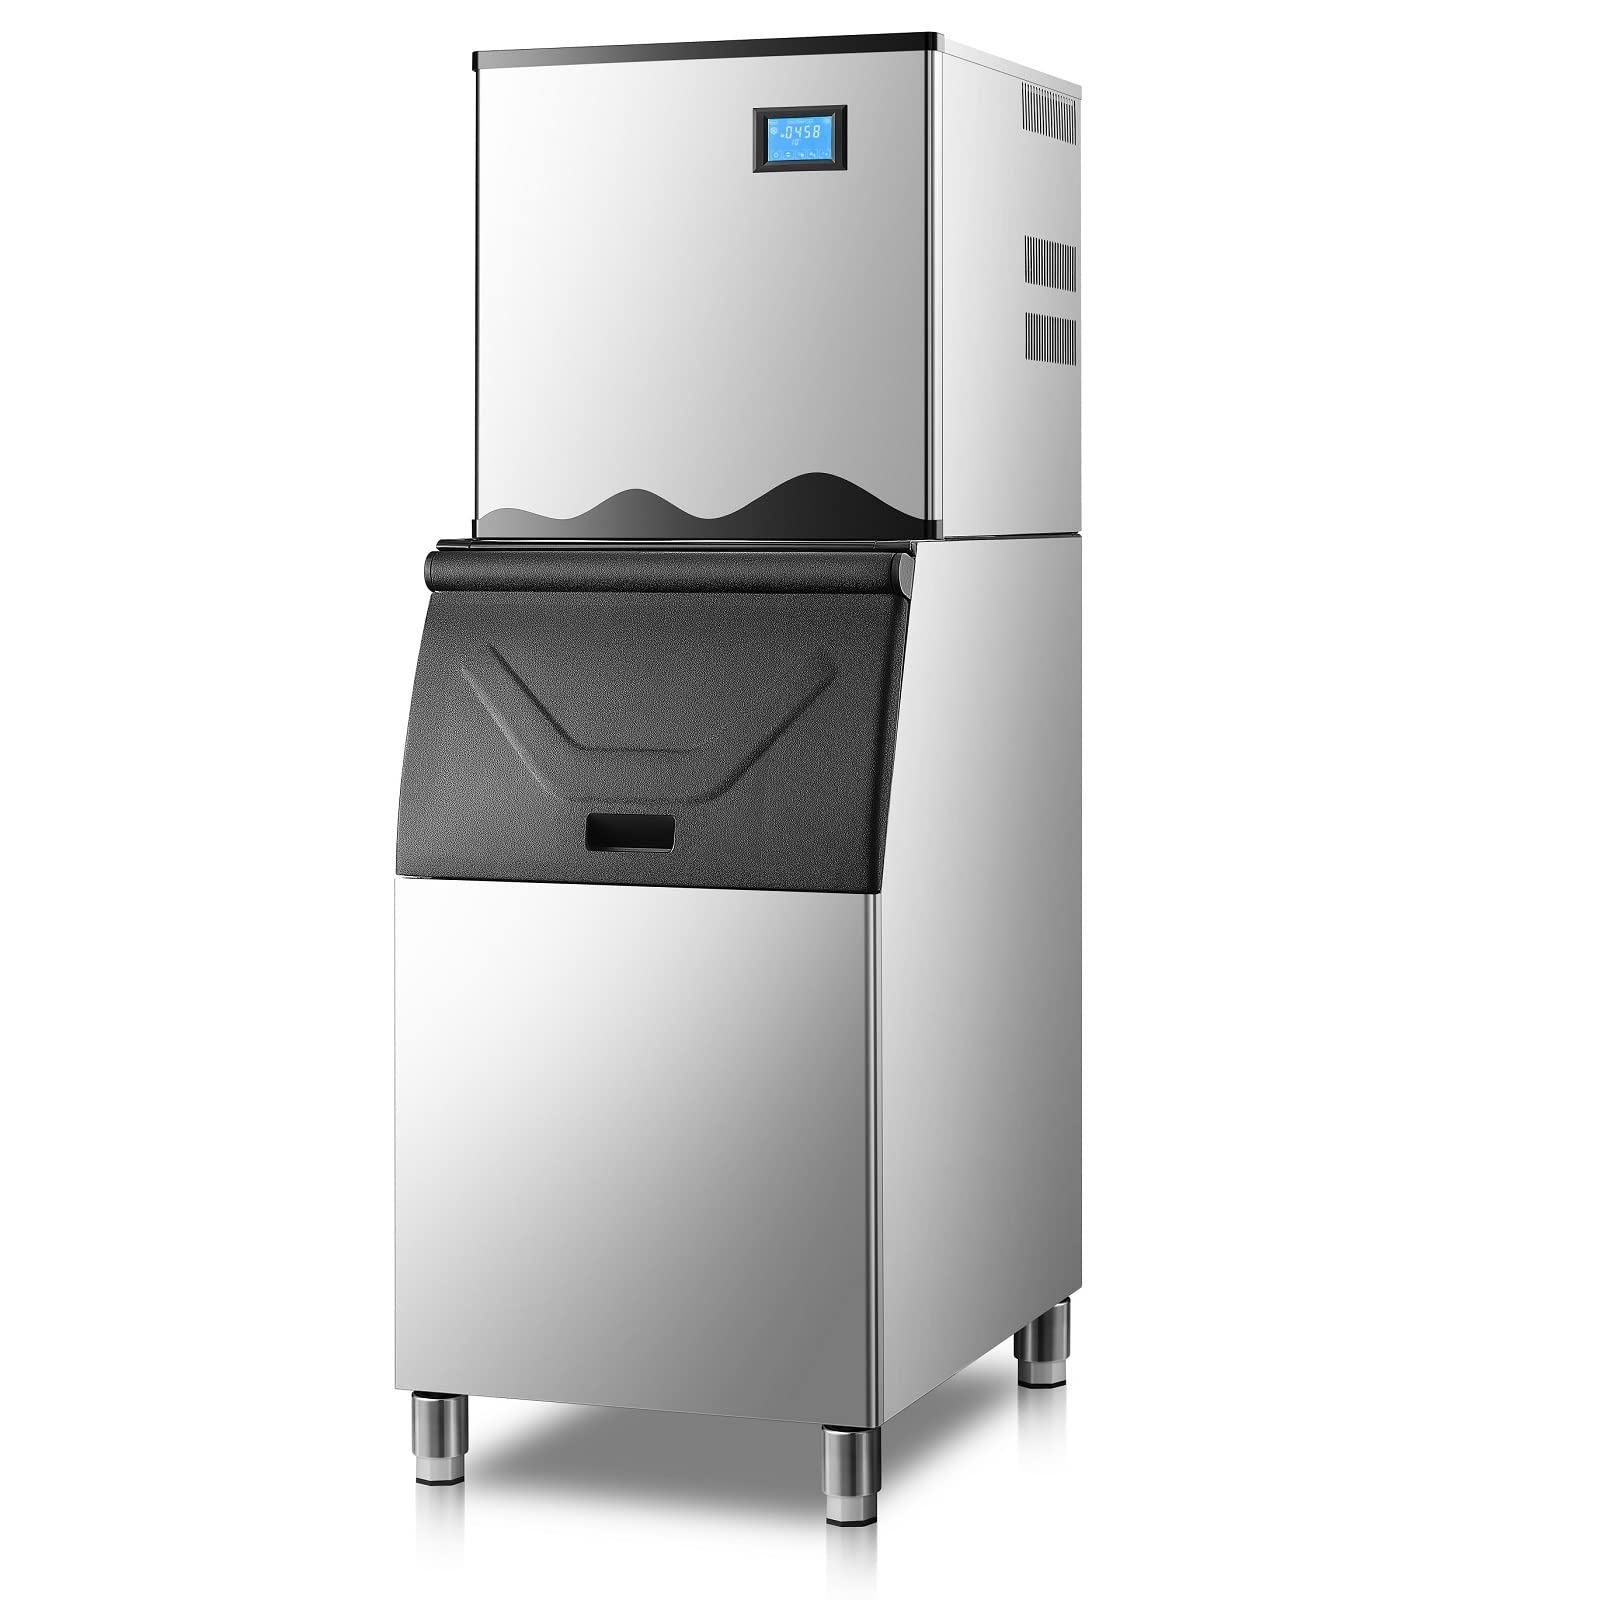 Ice Maker Countertop, Ice Maker 26-30lbs/Day, Self-Cleaning & Auto